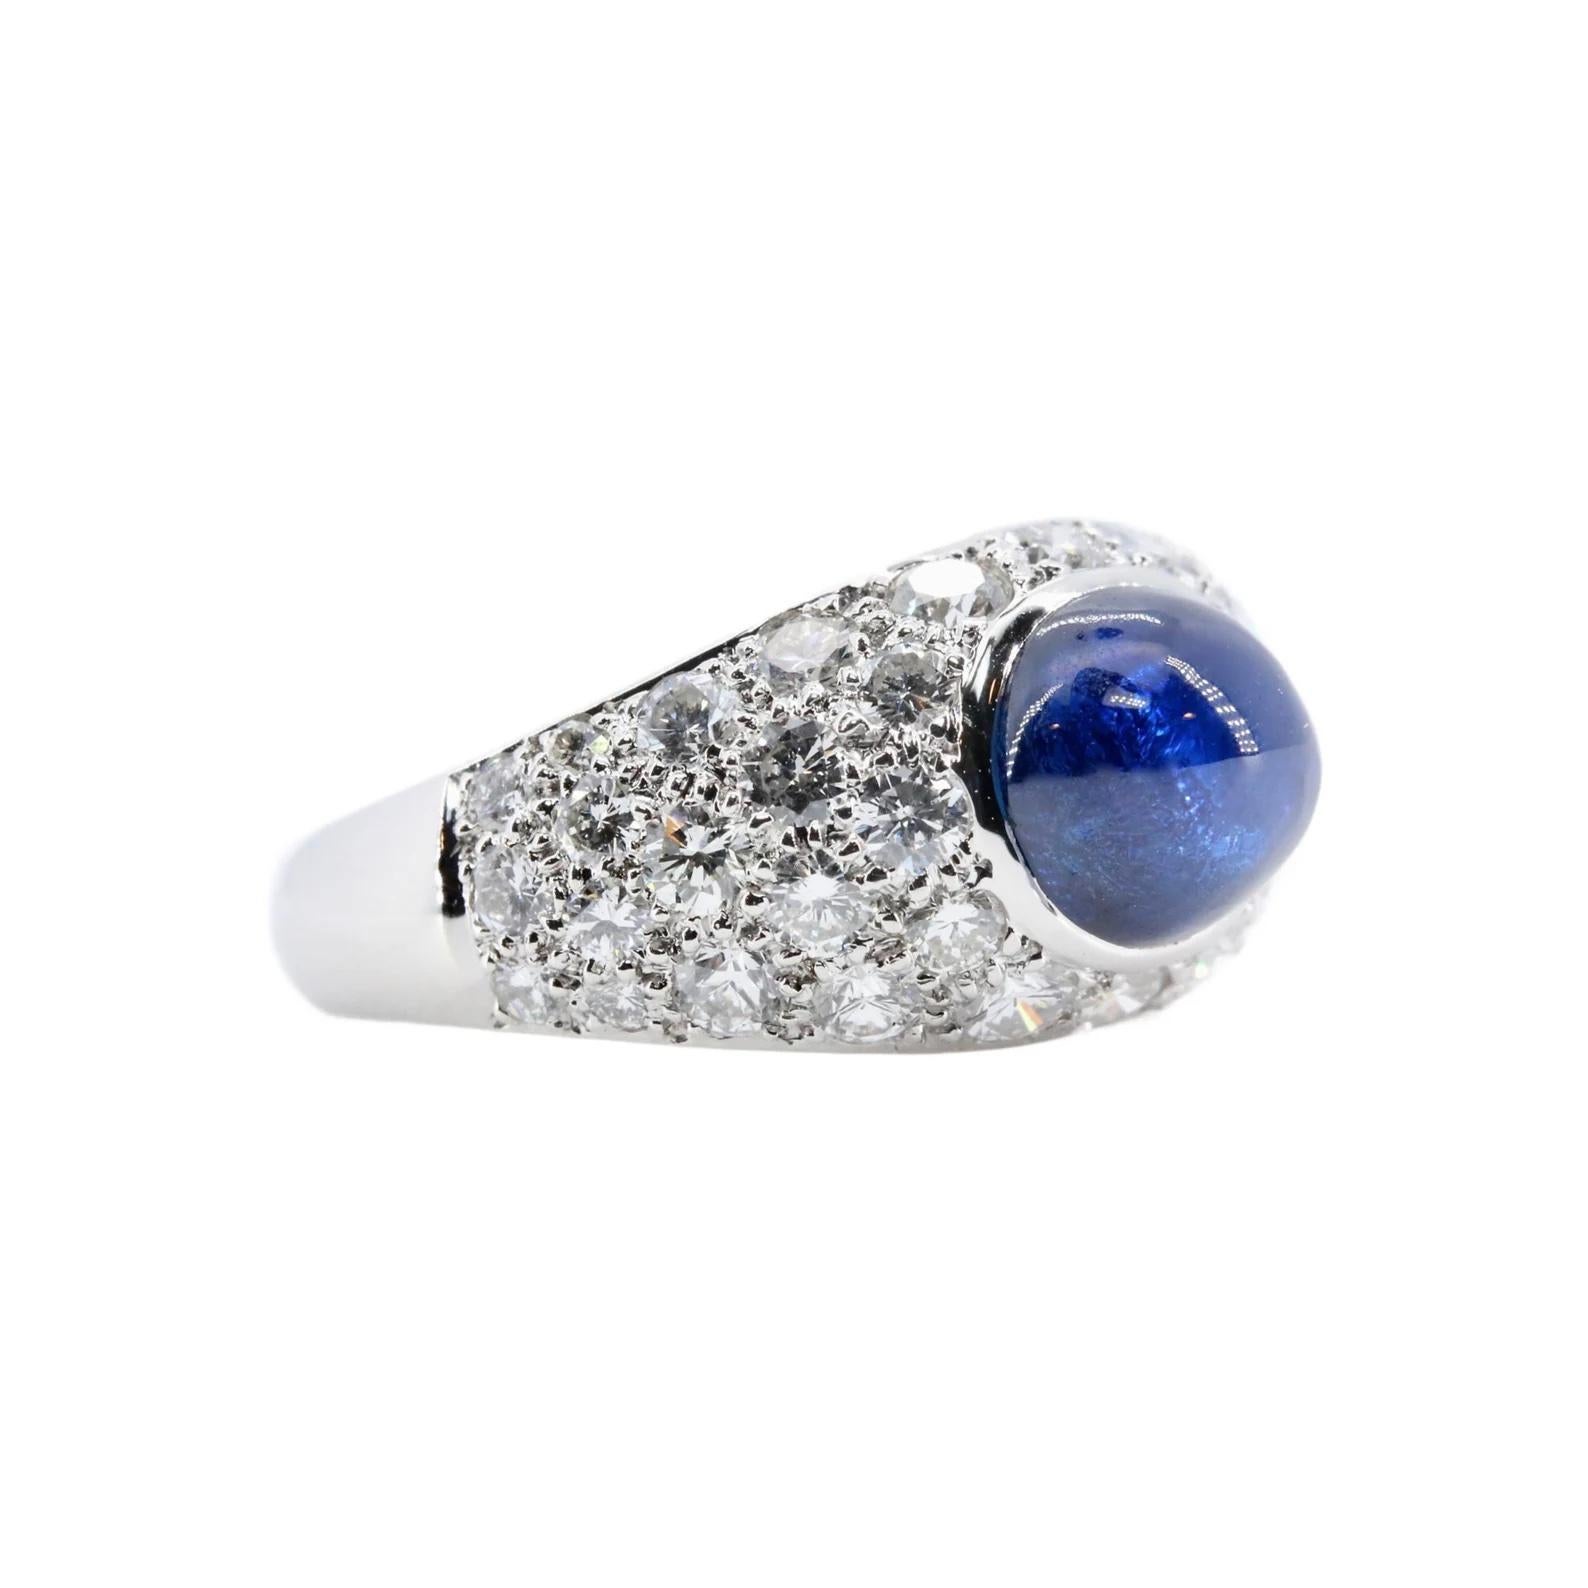 A sparkling mid century sapphire, and diamond cocktail ring in platinum. Centered by a cabochon cut oval Sapphire of approximately 3.25 carats with accompanying GIA report stating the sapphire is Heated only. Accenting the sapphire are 40 pave set